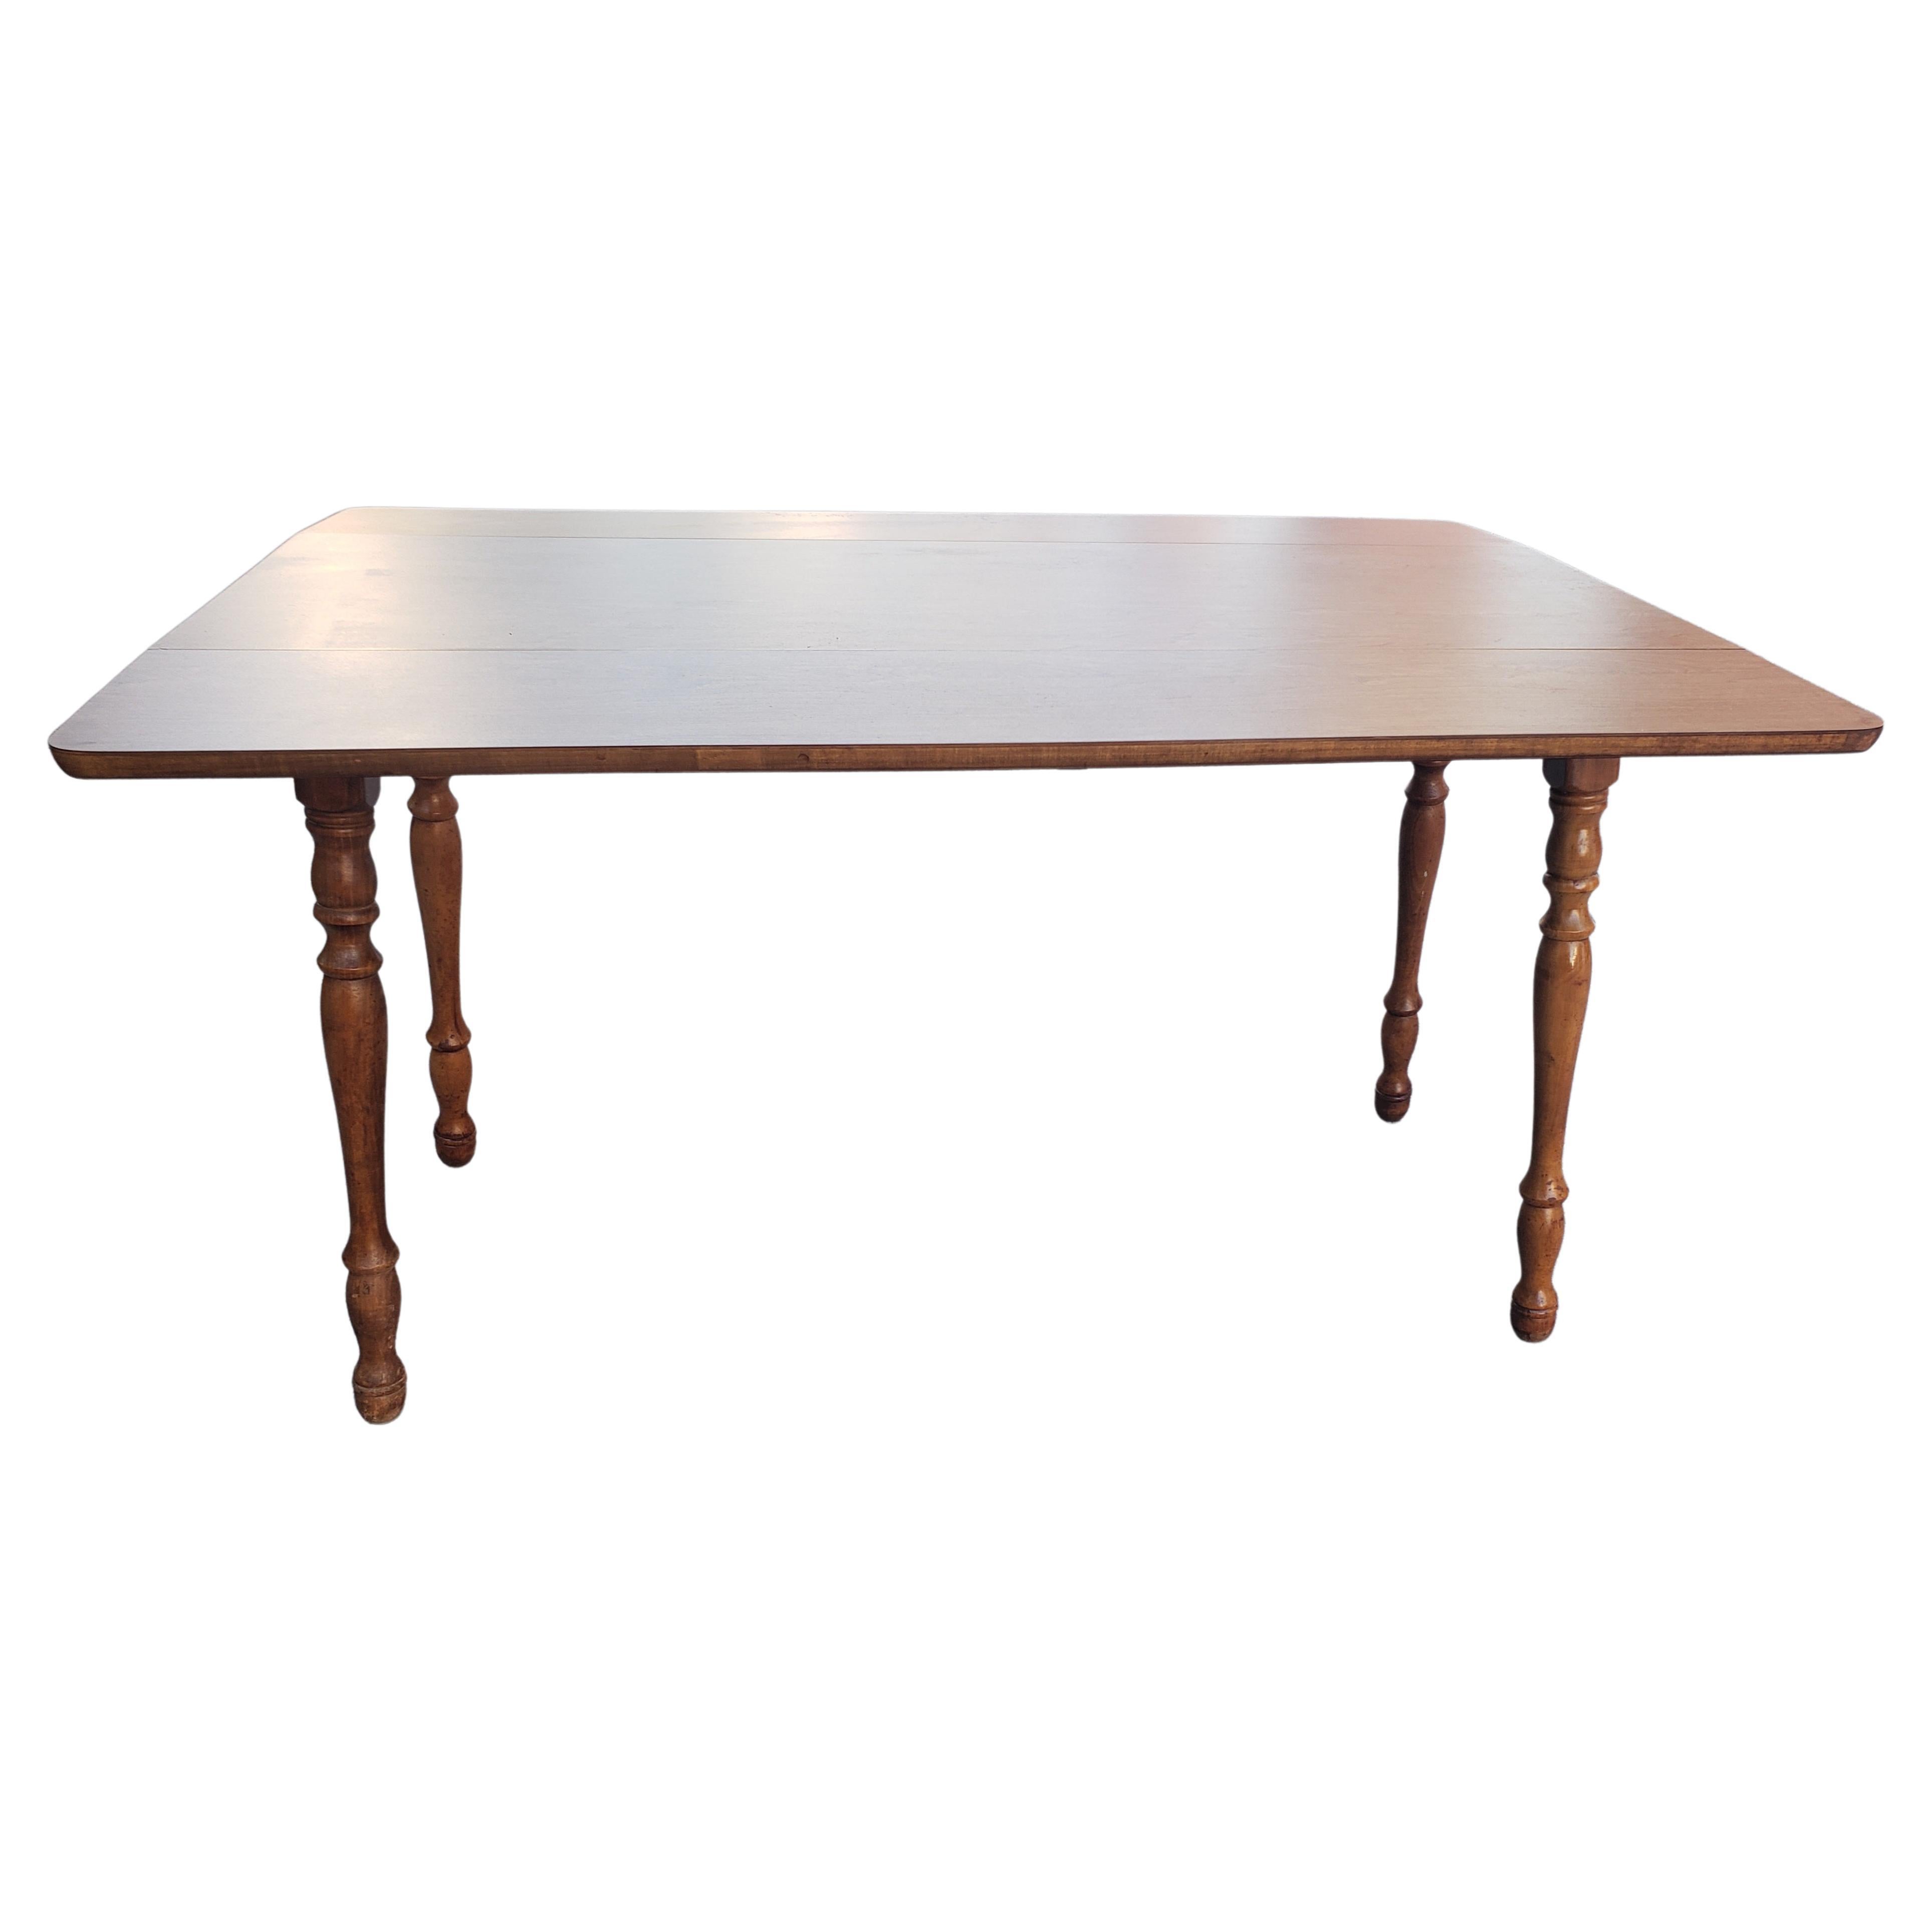 Vintage Pennsylvania House Farm House Style Drop Leaf Dining Table, Circa 1970s In Good Condition For Sale In Germantown, MD